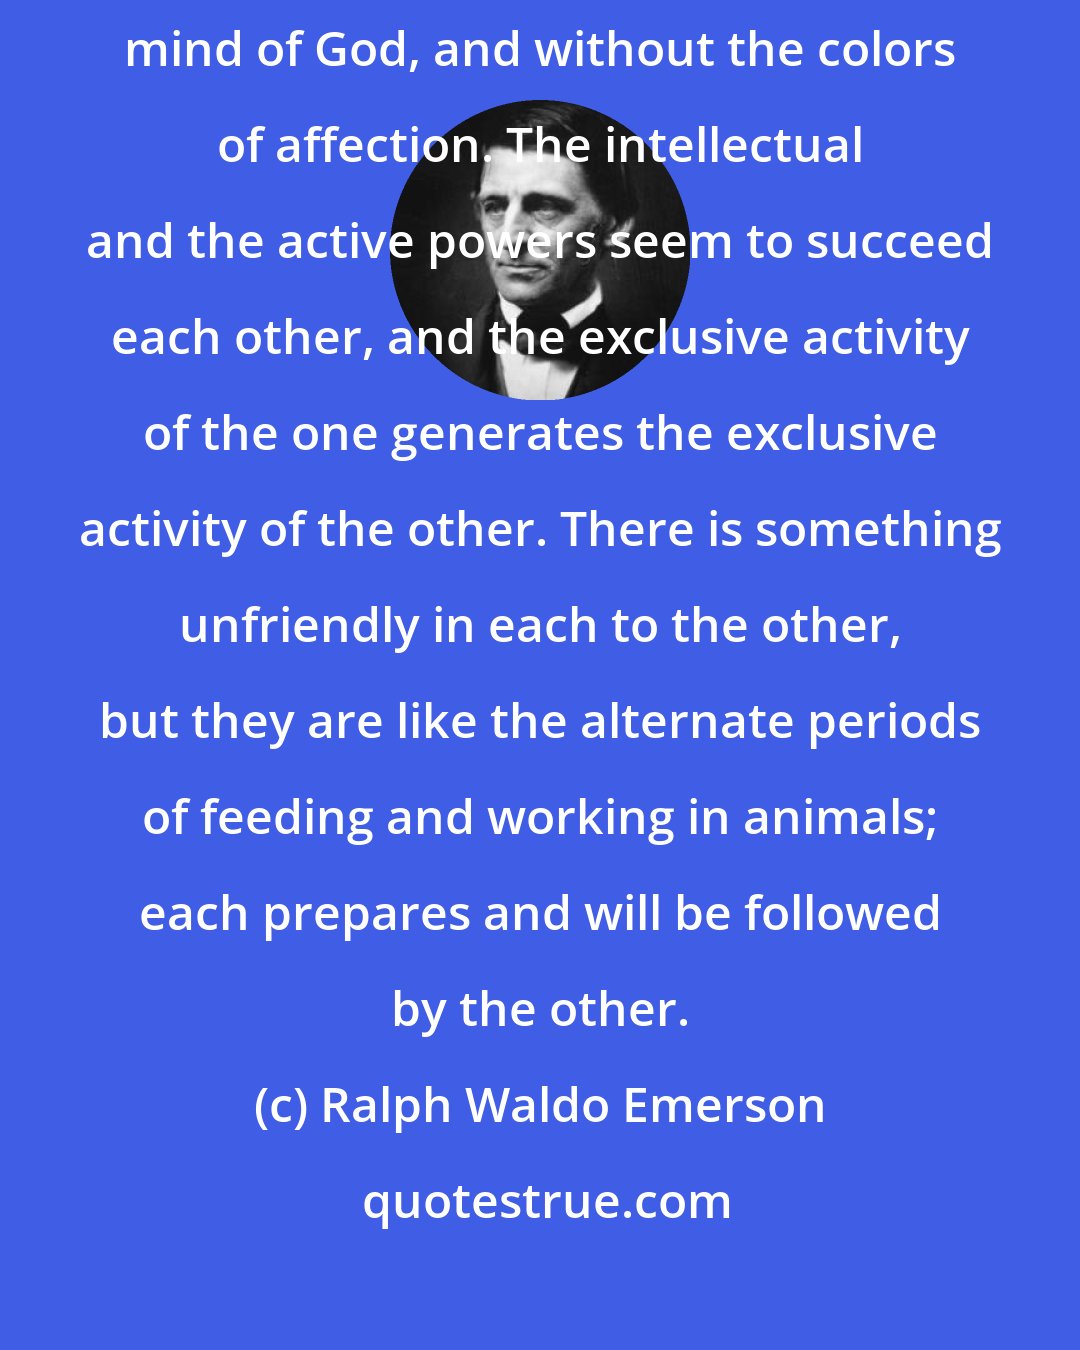 Ralph Waldo Emerson: The intellect searches out the Absolute order of things as they stand in the mind of God, and without the colors of affection. The intellectual and the active powers seem to succeed each other, and the exclusive activity of the one generates the exclusive activity of the other. There is something unfriendly in each to the other, but they are like the alternate periods of feeding and working in animals; each prepares and will be followed by the other.